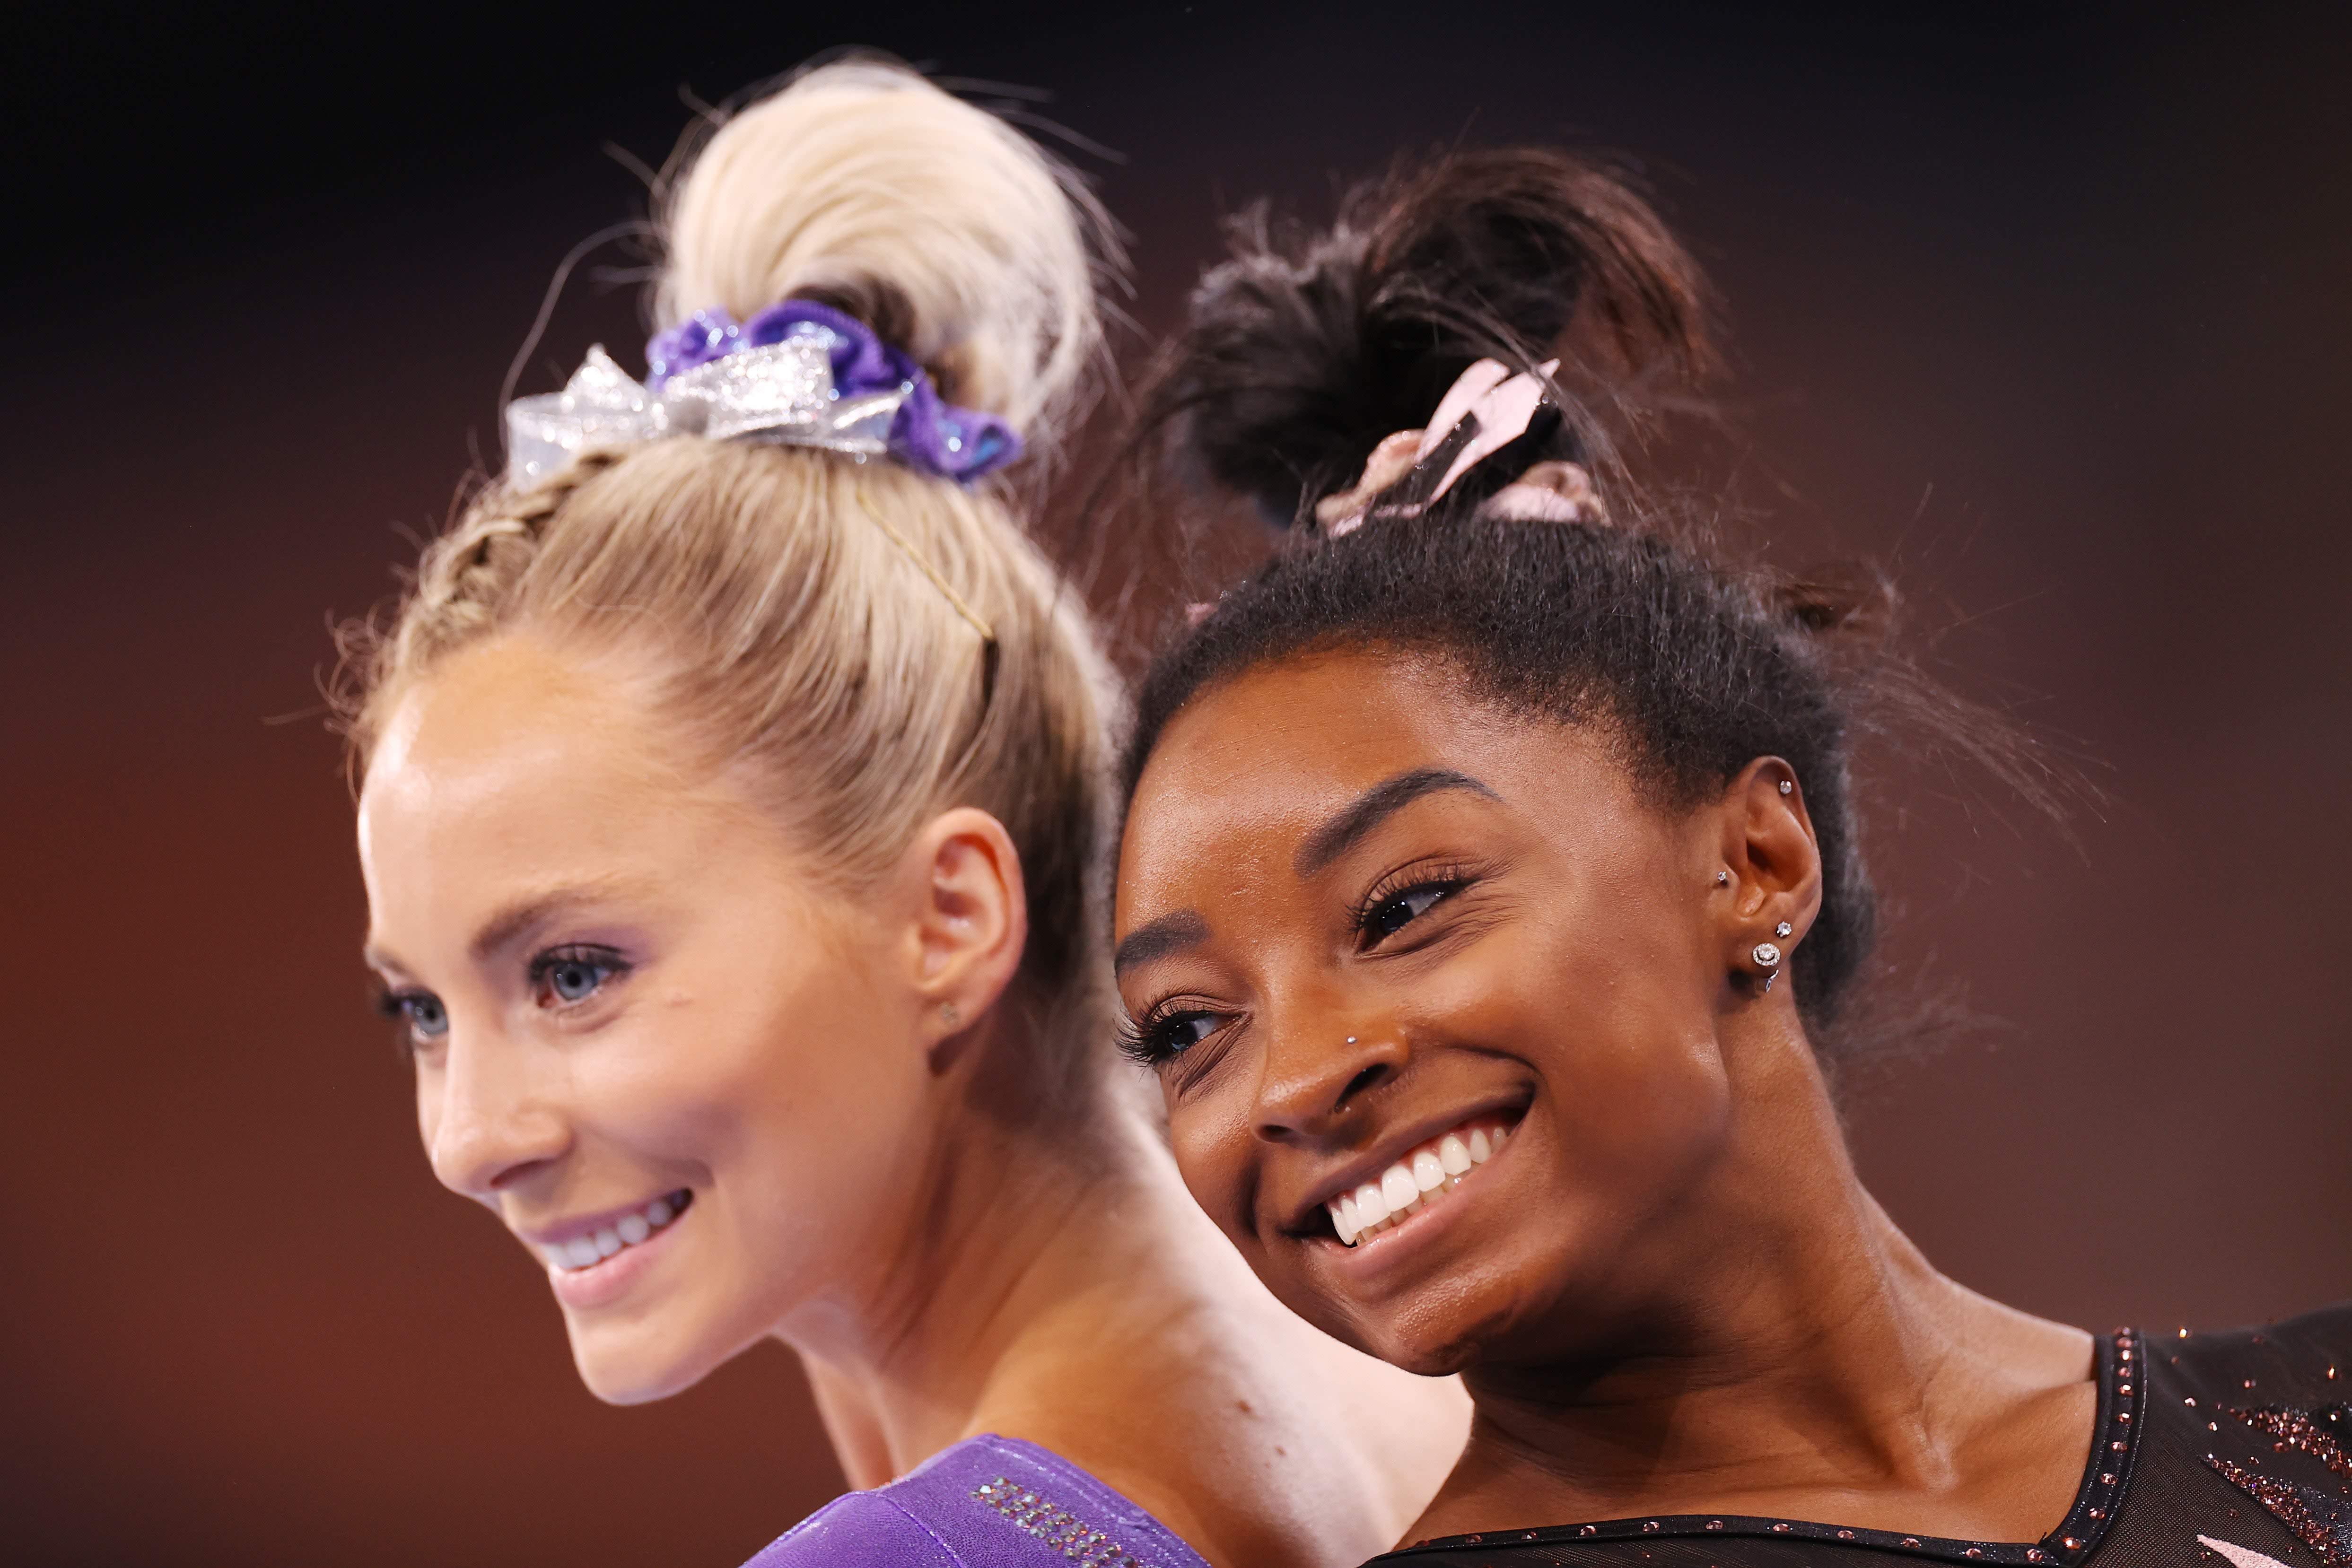 What’s Going on Between Simone Biles and MyKayla Skinner? An Explainer